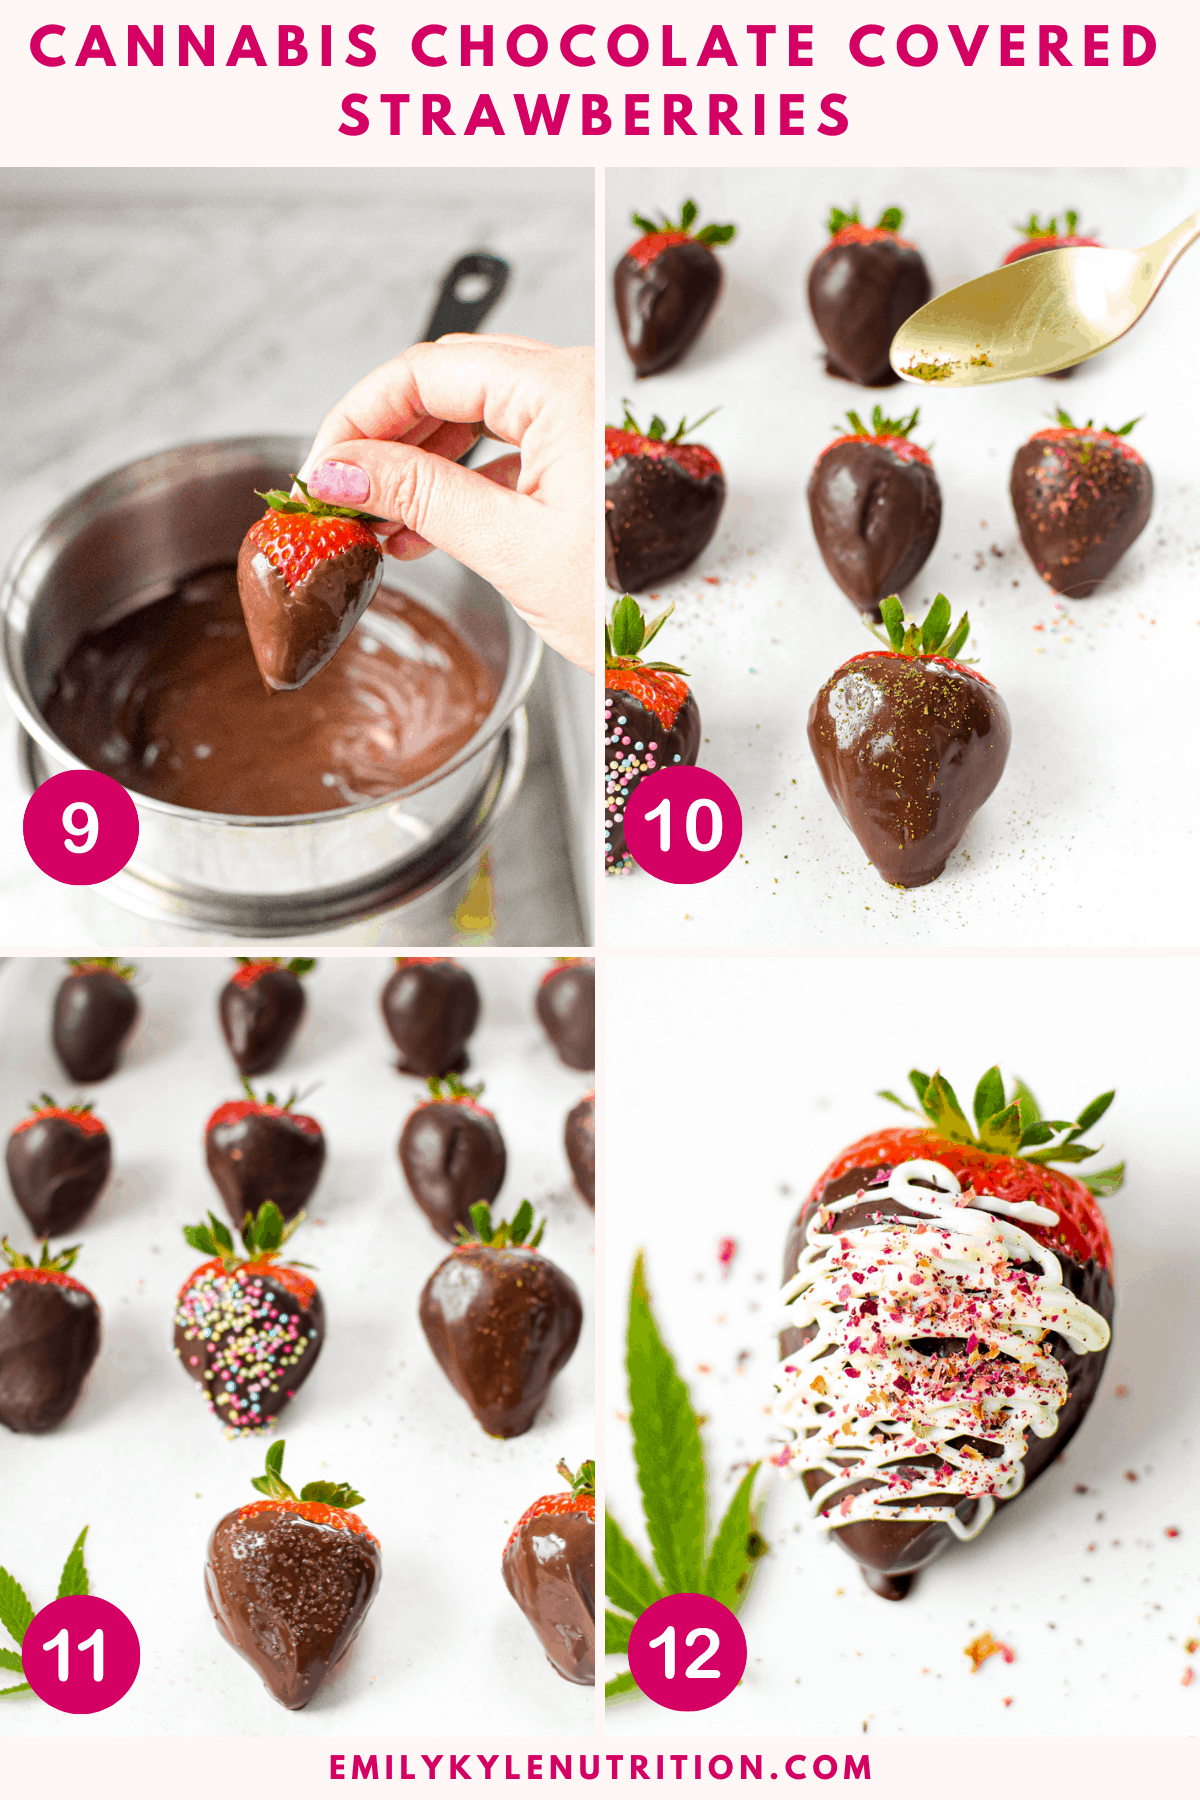 A 4 step image collage showing steps 9-12 including dipping the strawberries in chocolate, topping them with desired toppings, topping them with white chocolate and rose petals